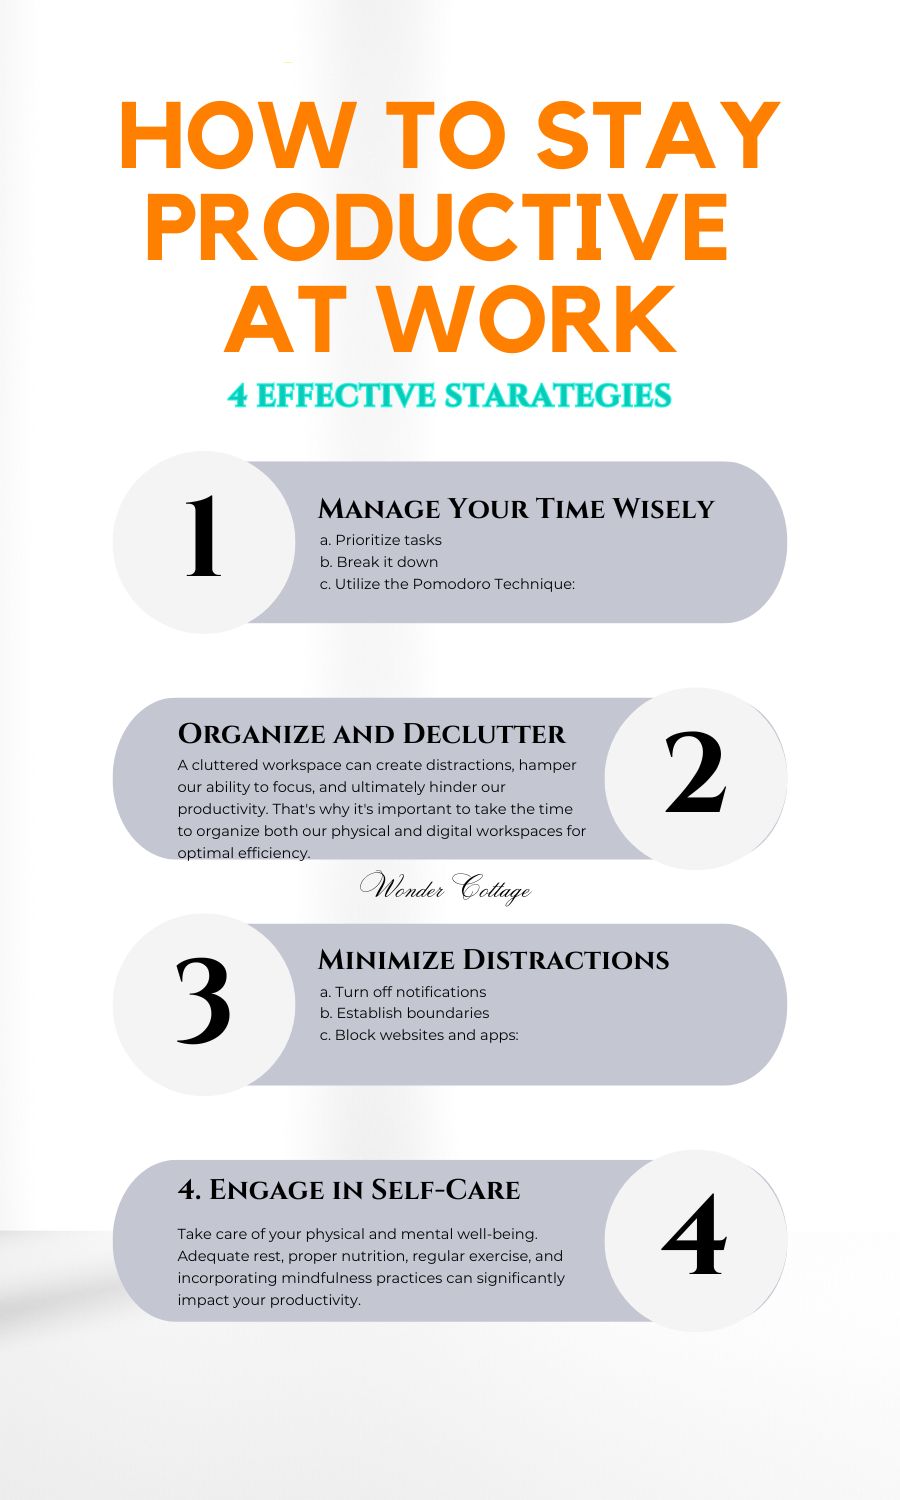 How to stay productive at work